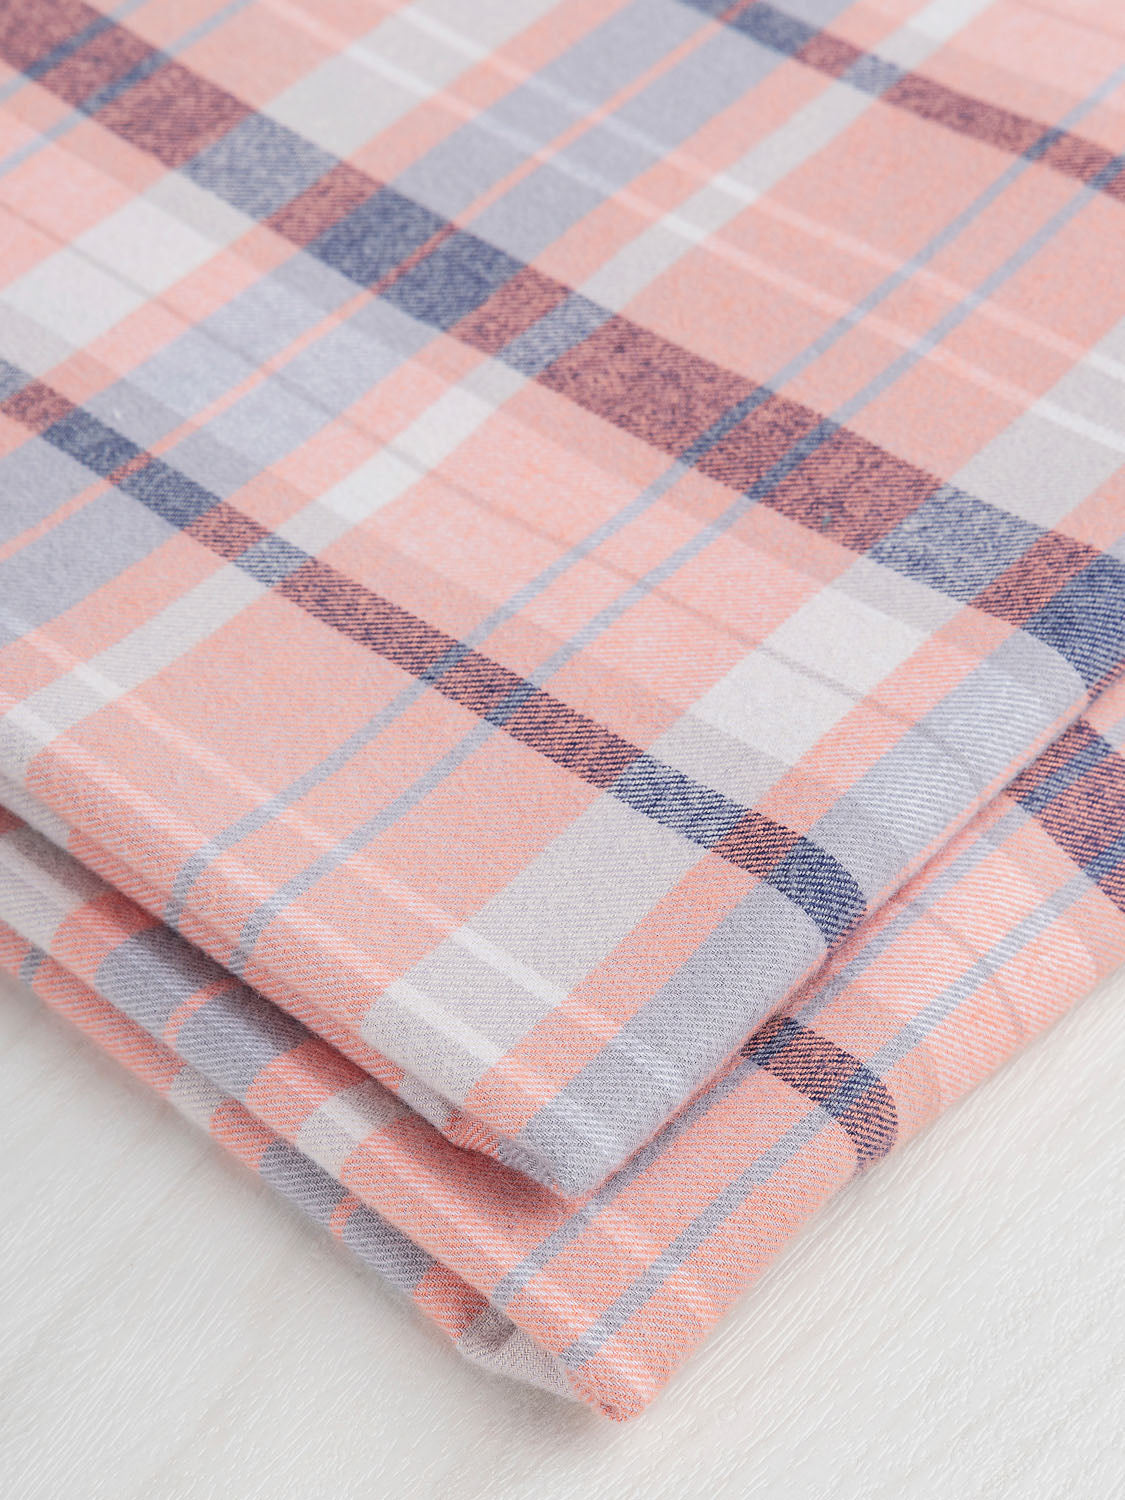 Plaid Cotton Flannel - Navy + Coral + Grey